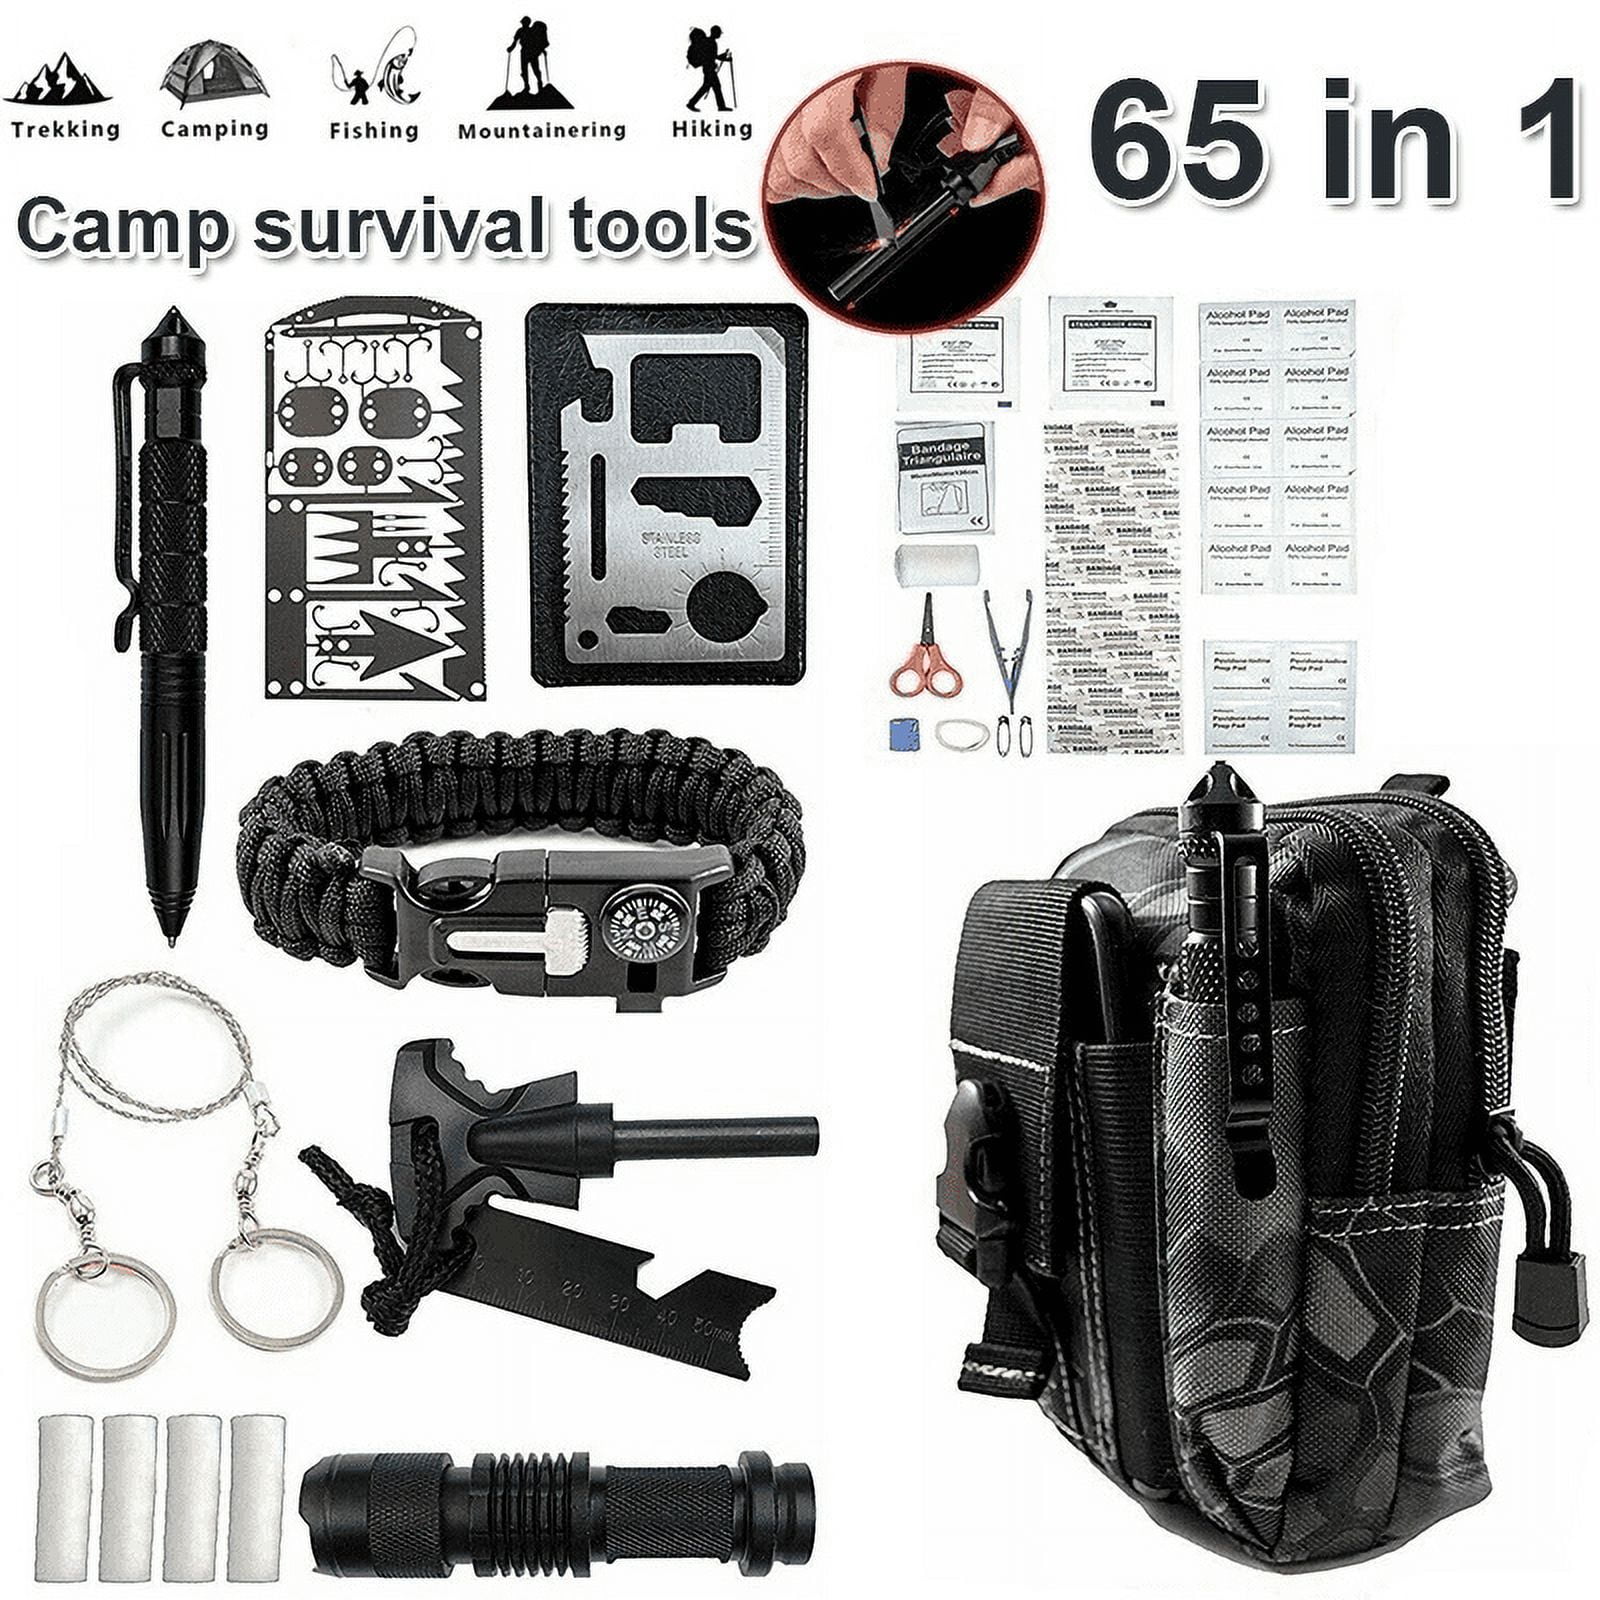 MDHAND 65 In 1 Survival Kits, Multi-fuctional Emergency Gear and Equipment  EDC Tool SOS, Tactical Sets Backpack Outdoor for Wilderness, Trip, Hiking